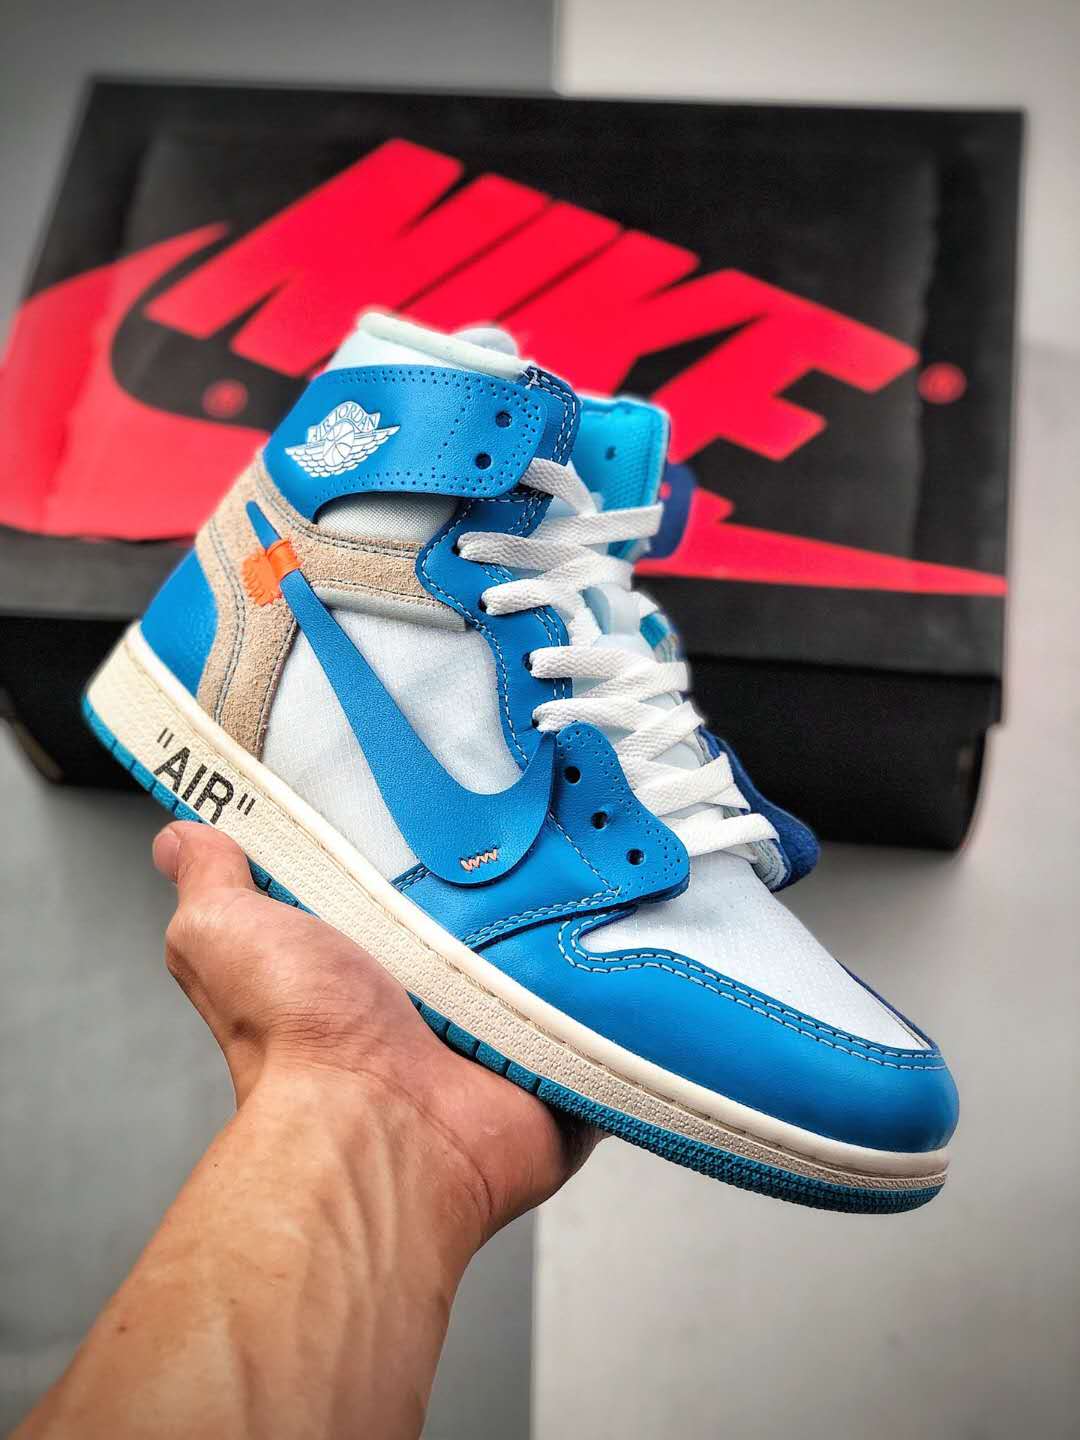 Off-White x Air Jordan 1 Retro High OG 'UNC' AQ0818-148 – Iconic Collaboration in Classic Colors